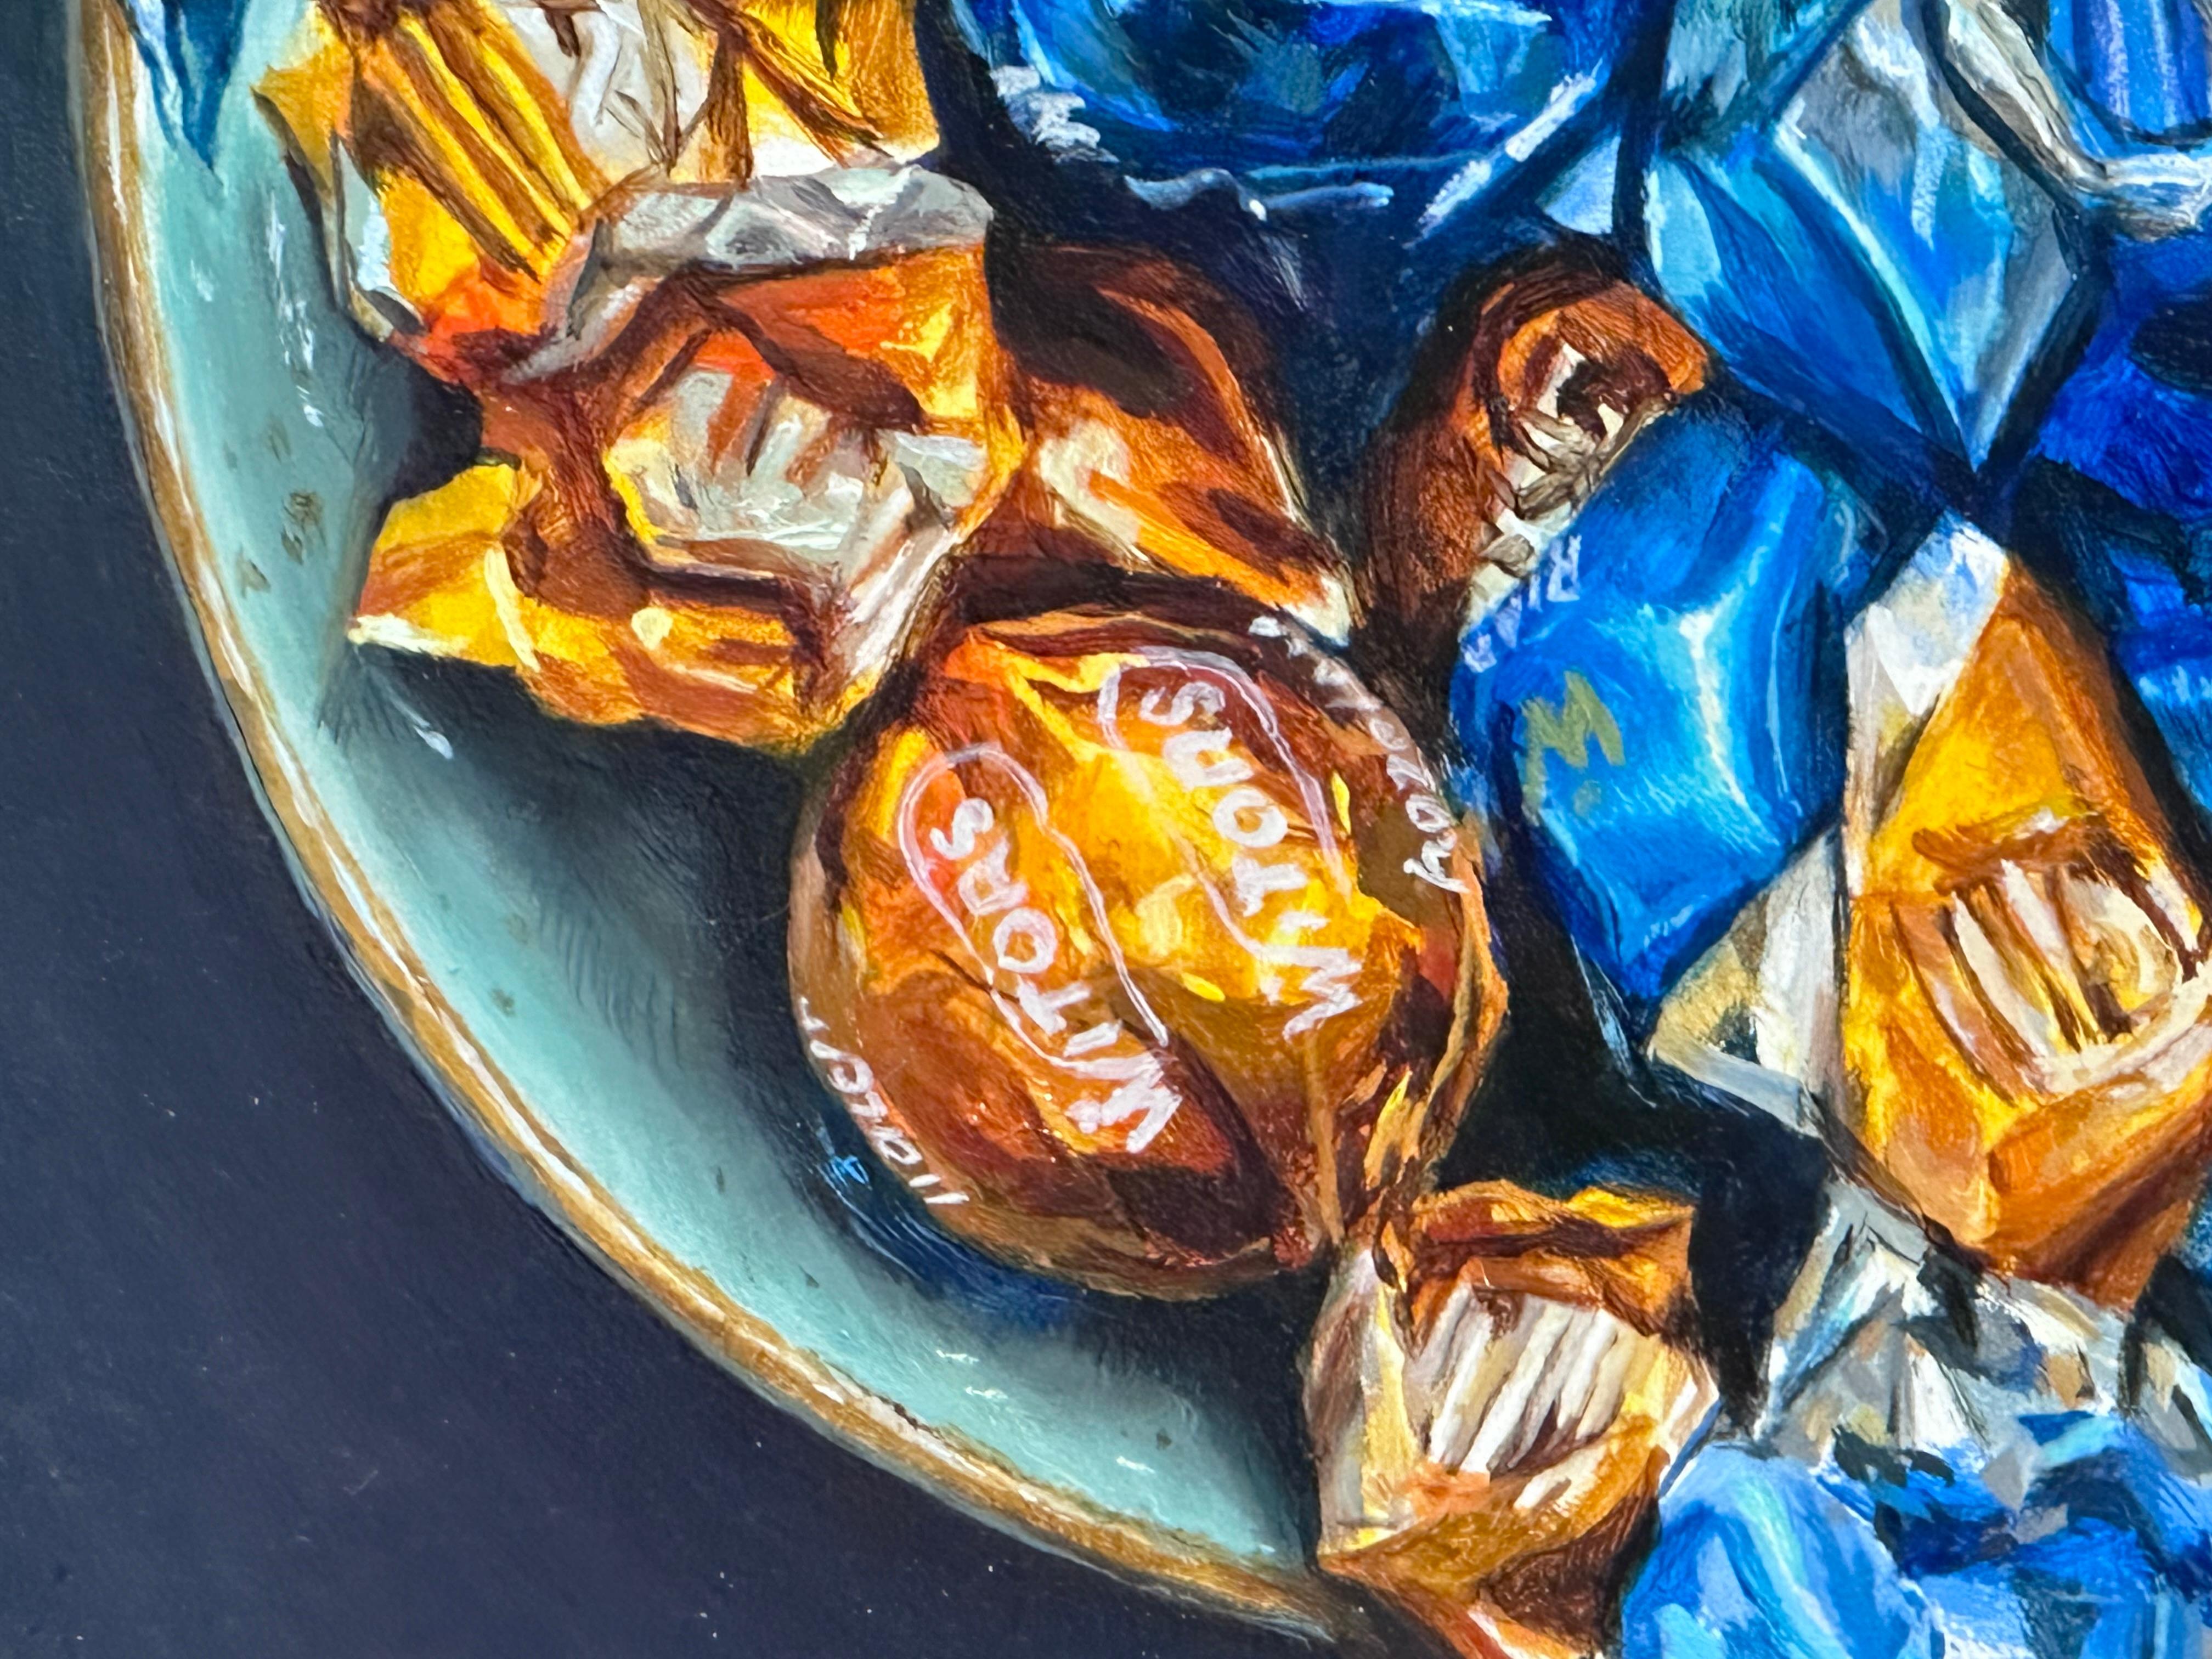 Temptation Island- 21st Century Stilllife painting of a bowl with sweets - Contemporary Painting by Erik van Elven